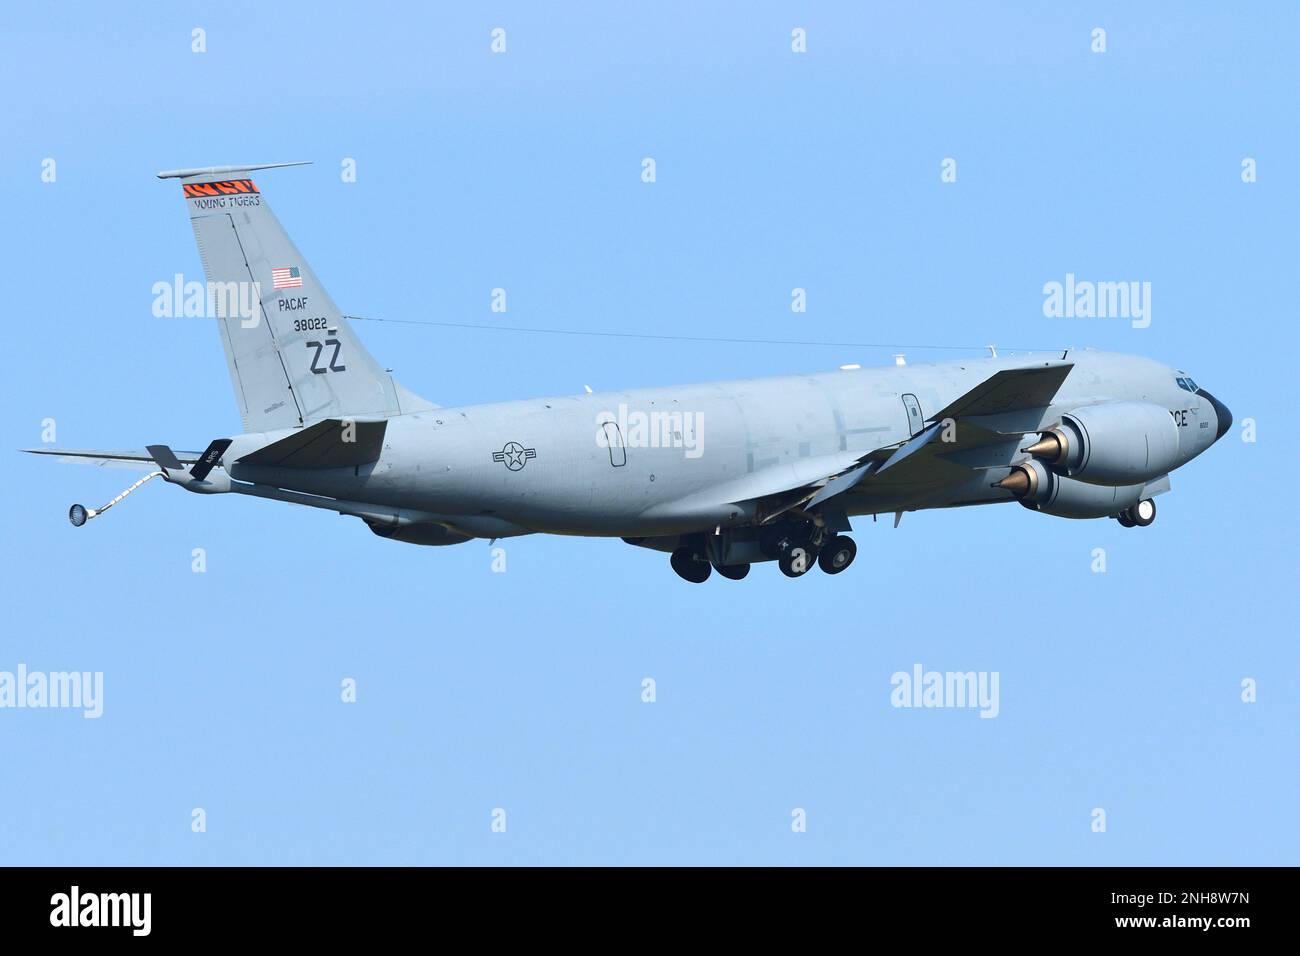 Tokyo, Japan - July 22, 2018: United States Air Force Boeing KC-135R Stratotanker aerial refuelling and transport aircraft. Stock Photo